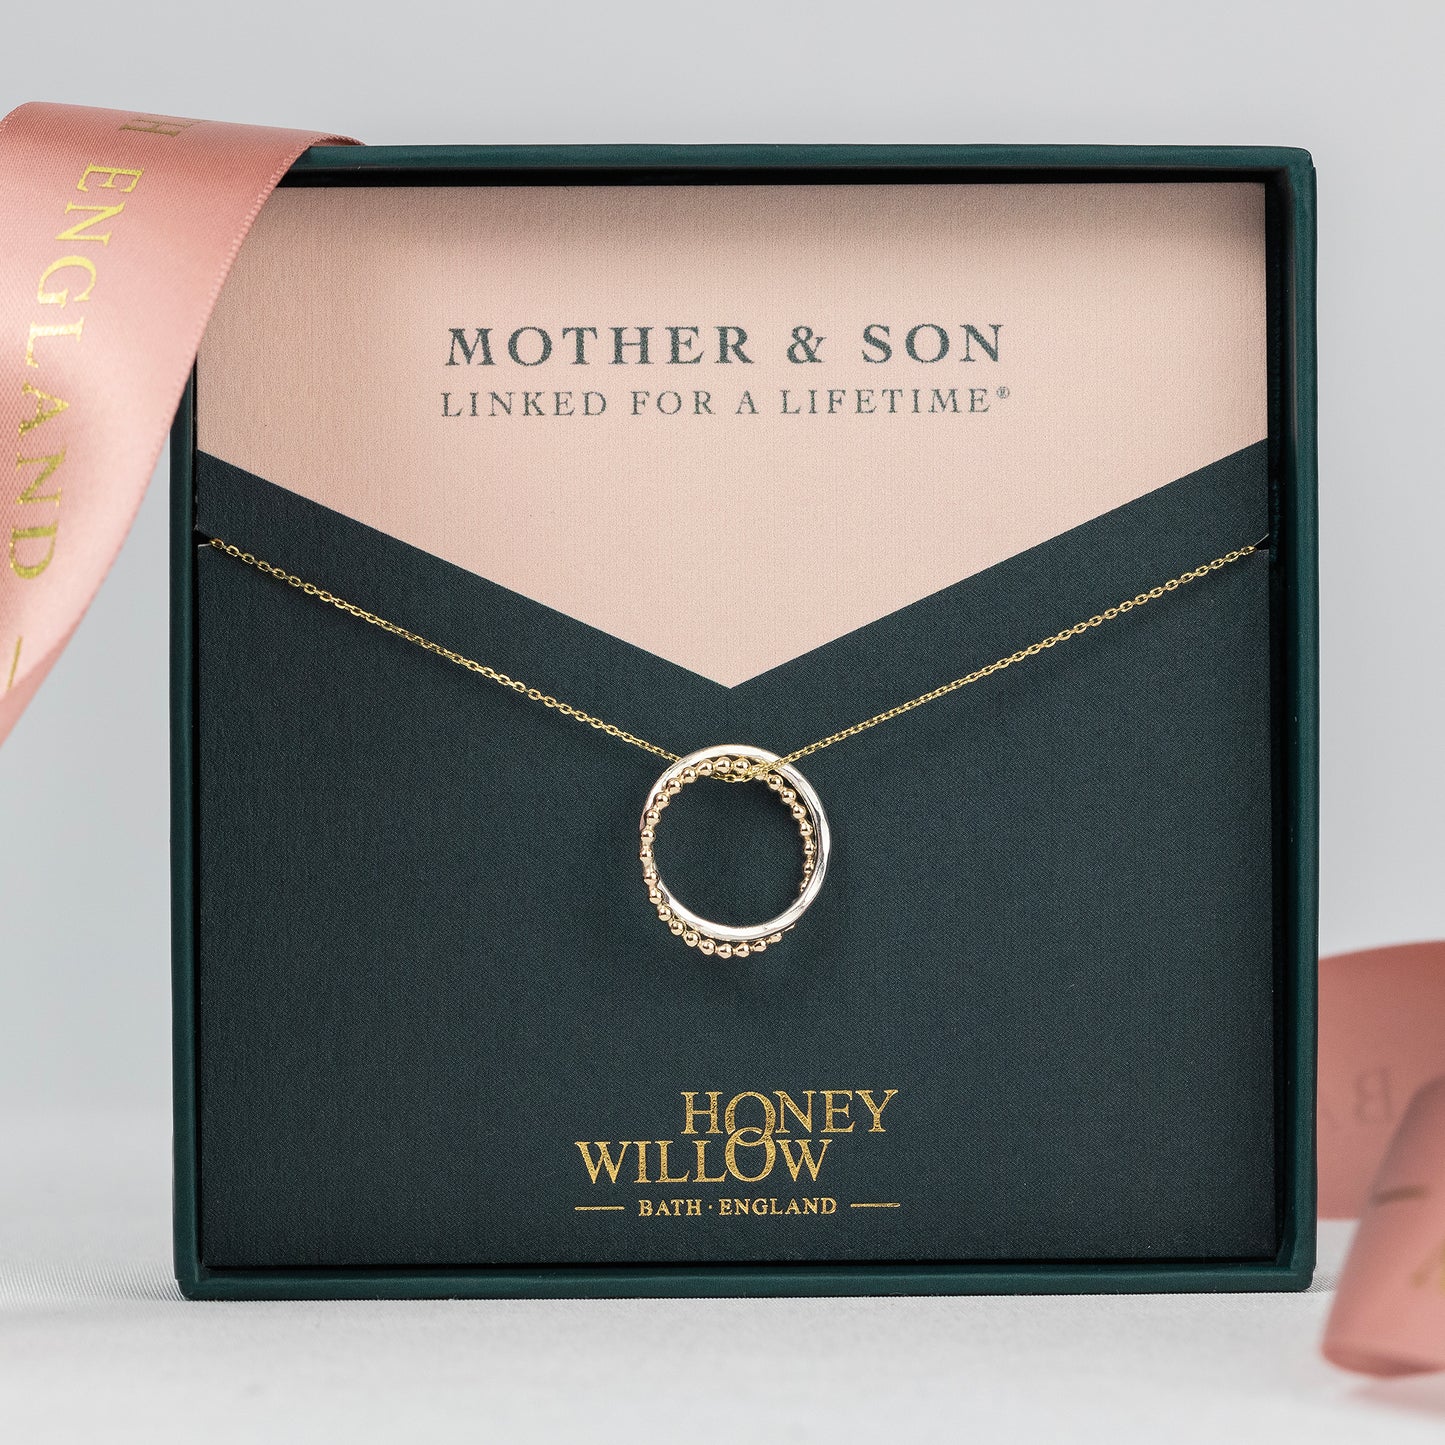 Mother & Son Necklace - Linked for a Lifetime - 9kt Gold & Silver